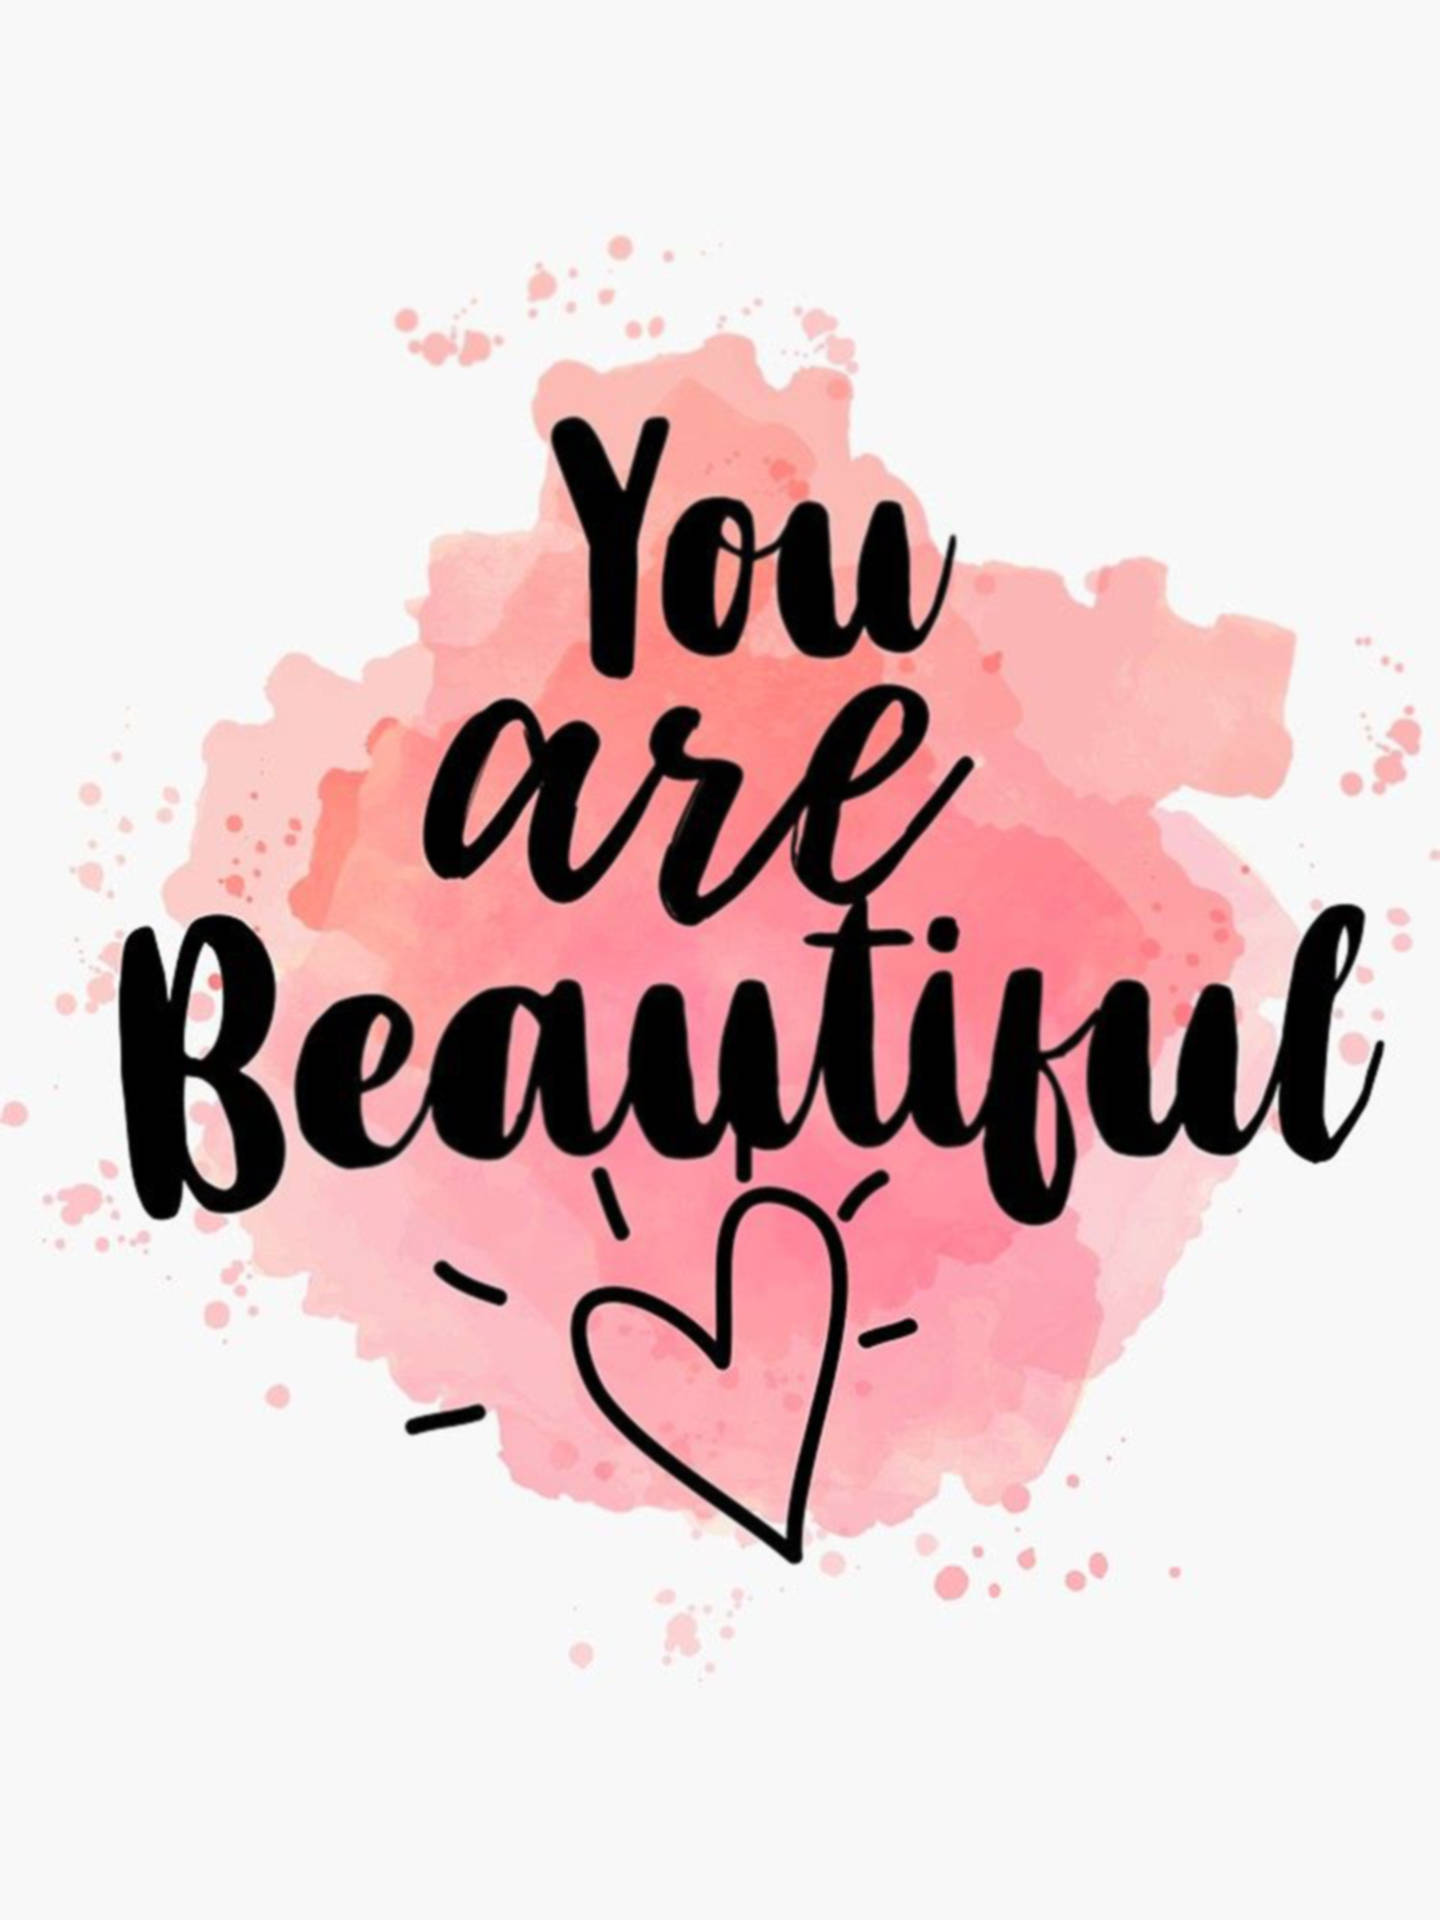 Empowerment Through Affirmation - You Are Beautiful Poster